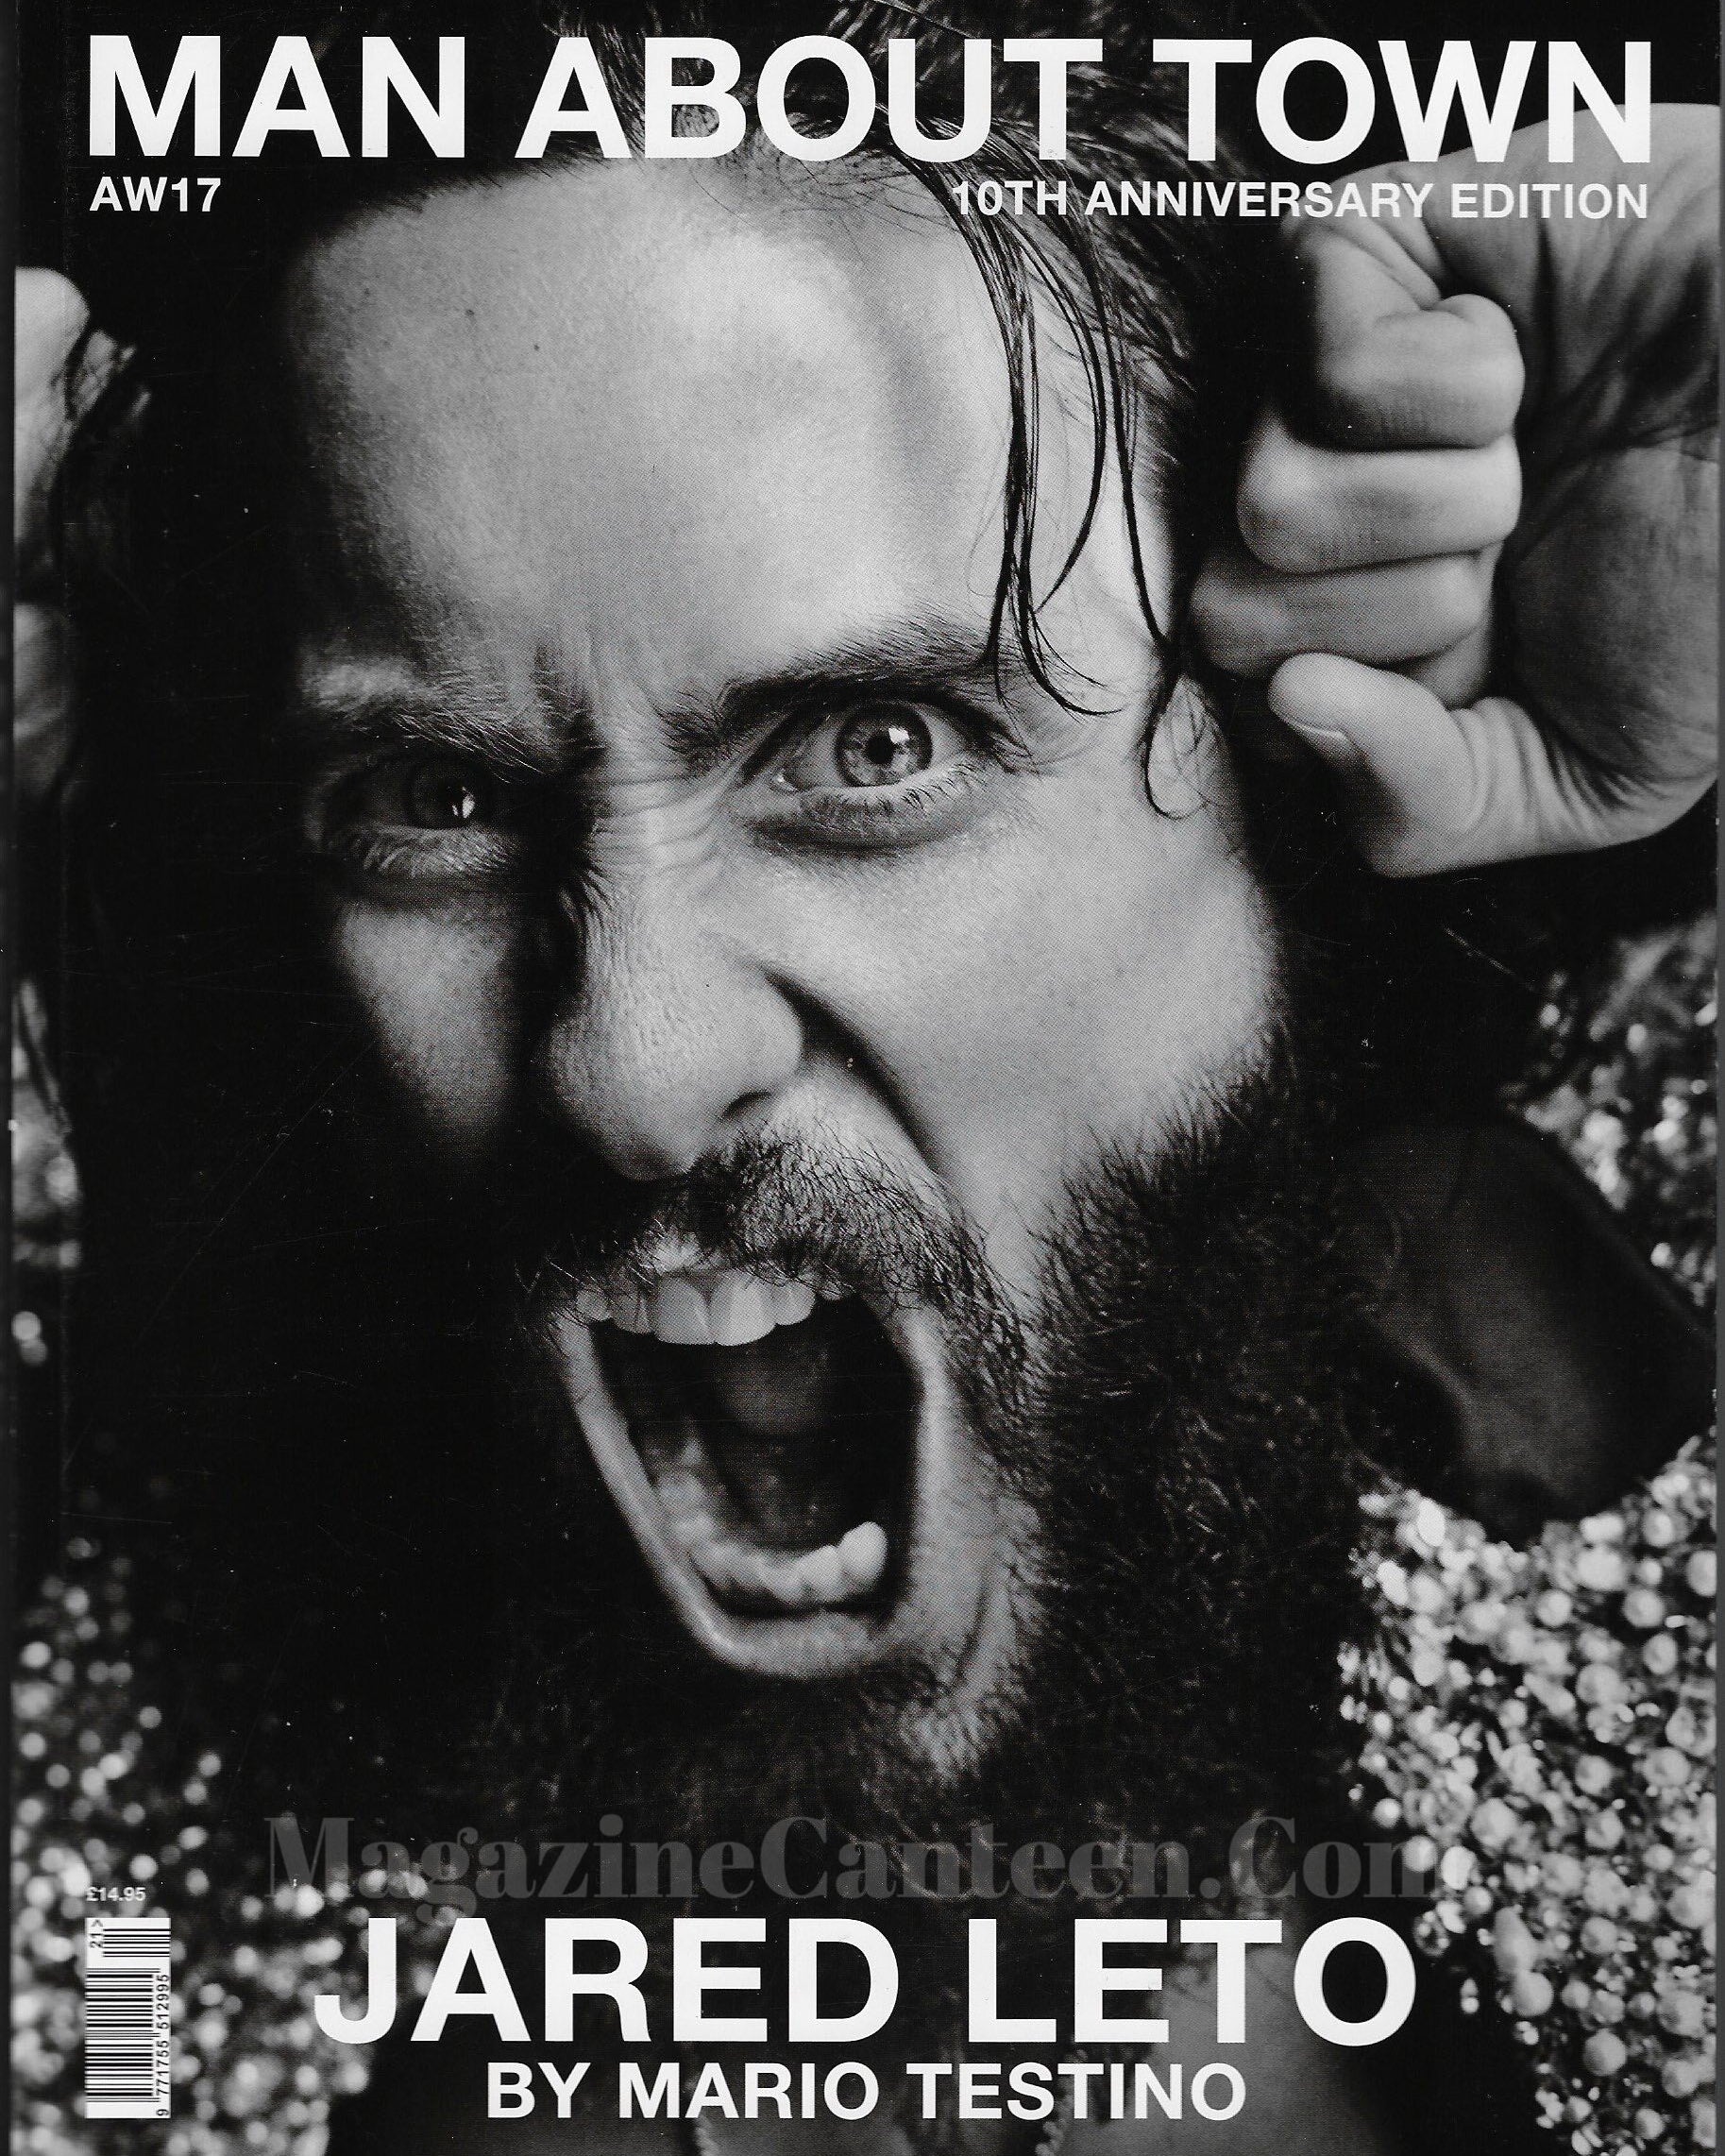 Man About Town Magazine - Jared Leto 2017